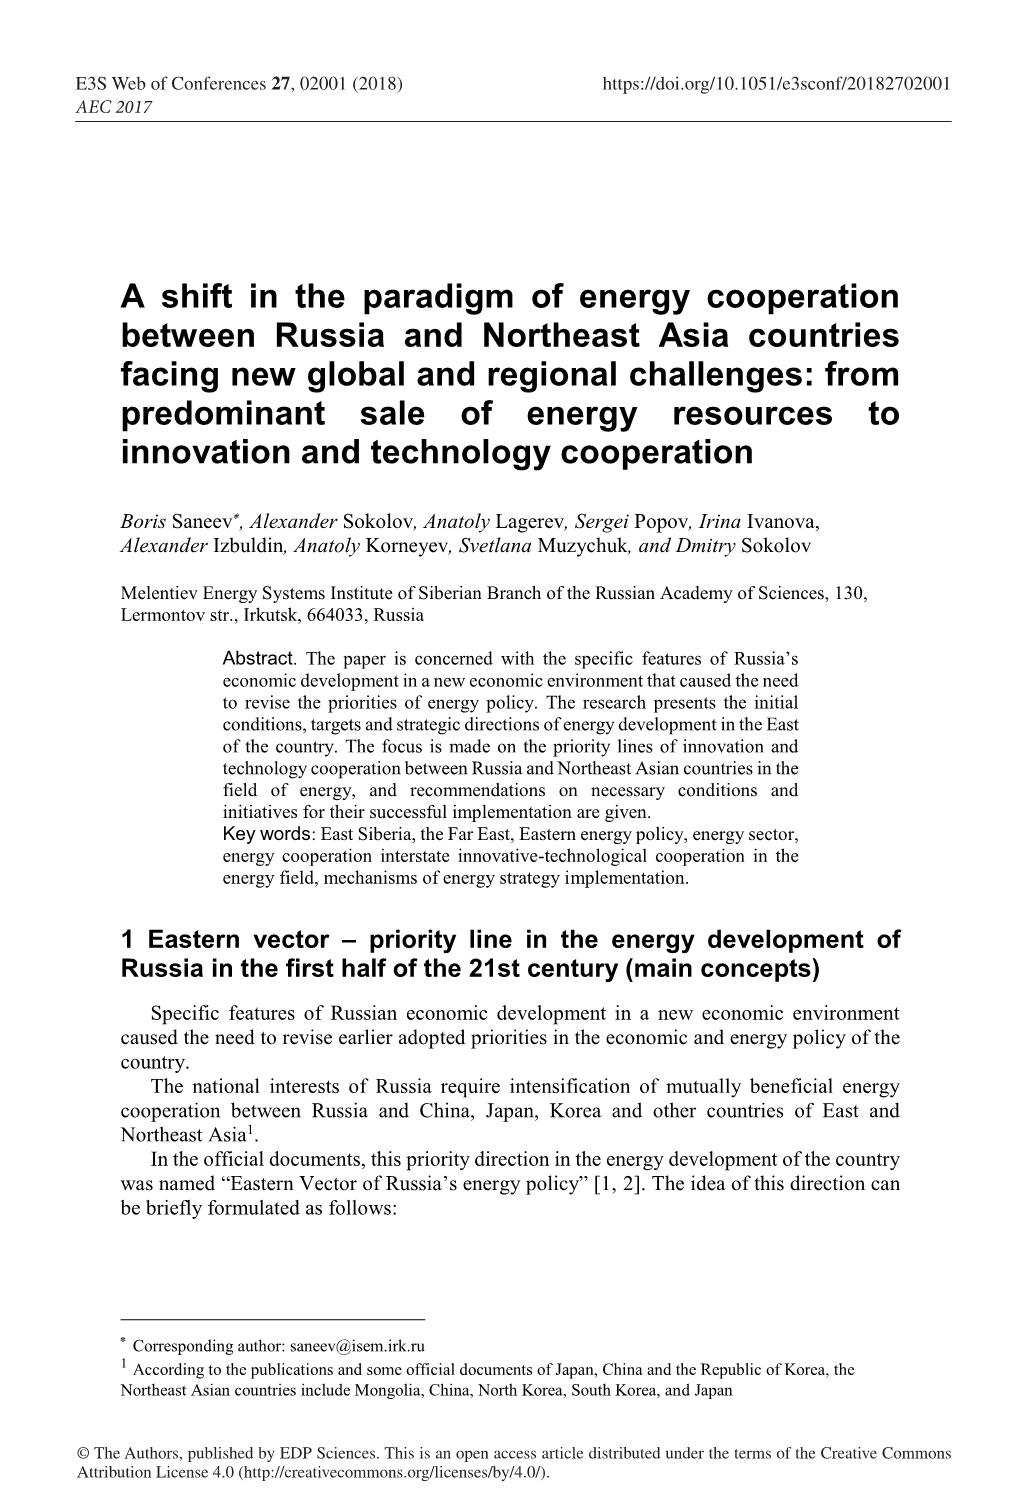 A Shift in the Paradigm of Energy Cooperation Between Russia And